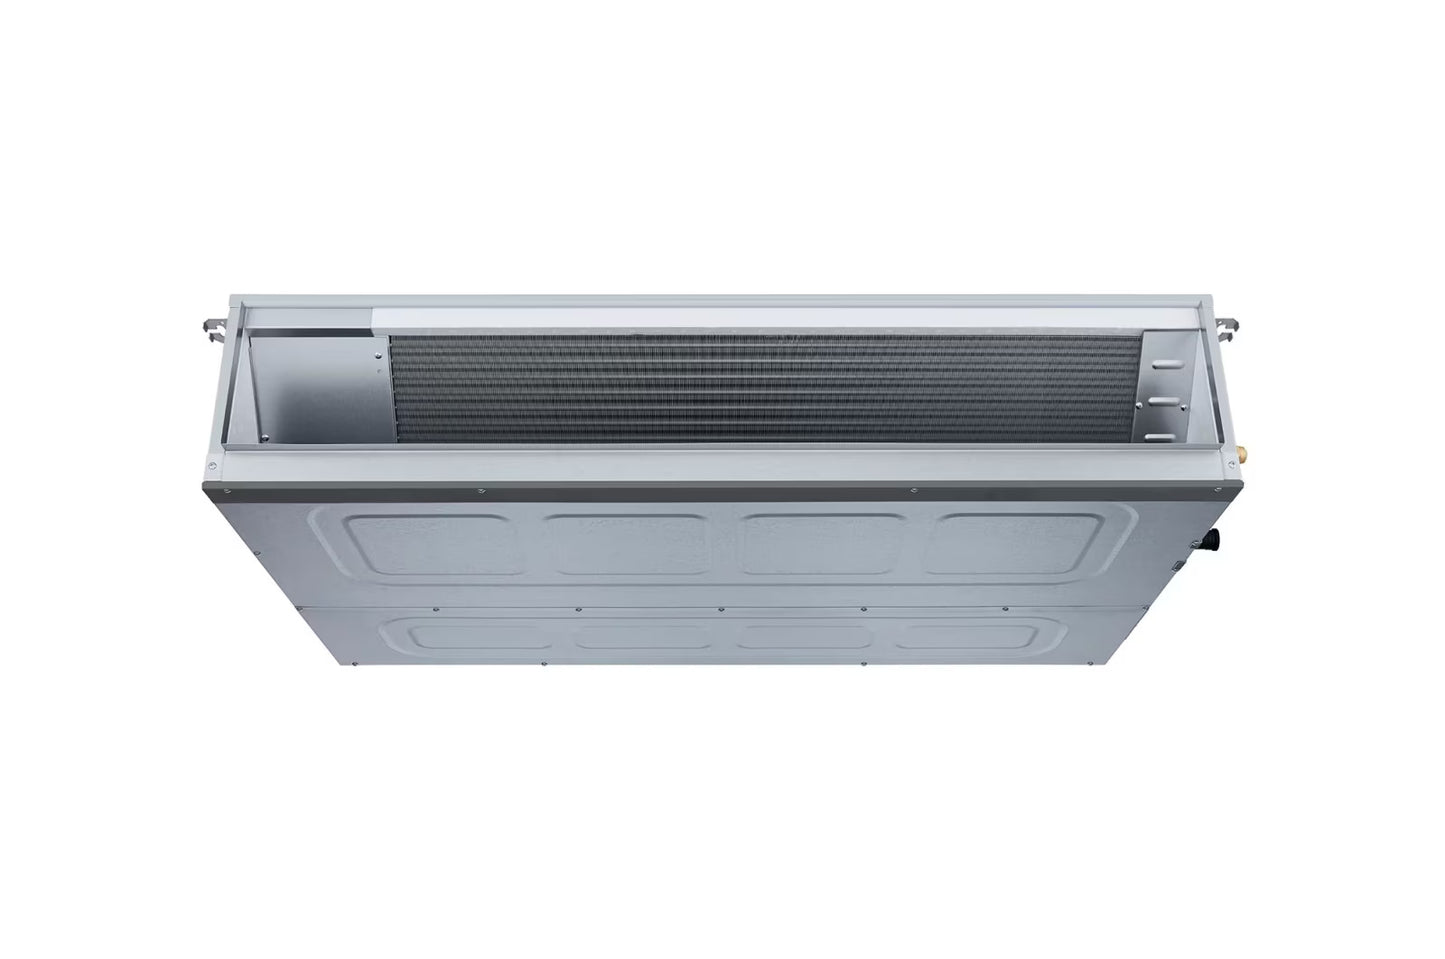 LG Ceiling Concealed Duct INV Unit 2.2KW with Mid Static and E.S.P. Control for Multiple Rooms - ARNU07GM1A4